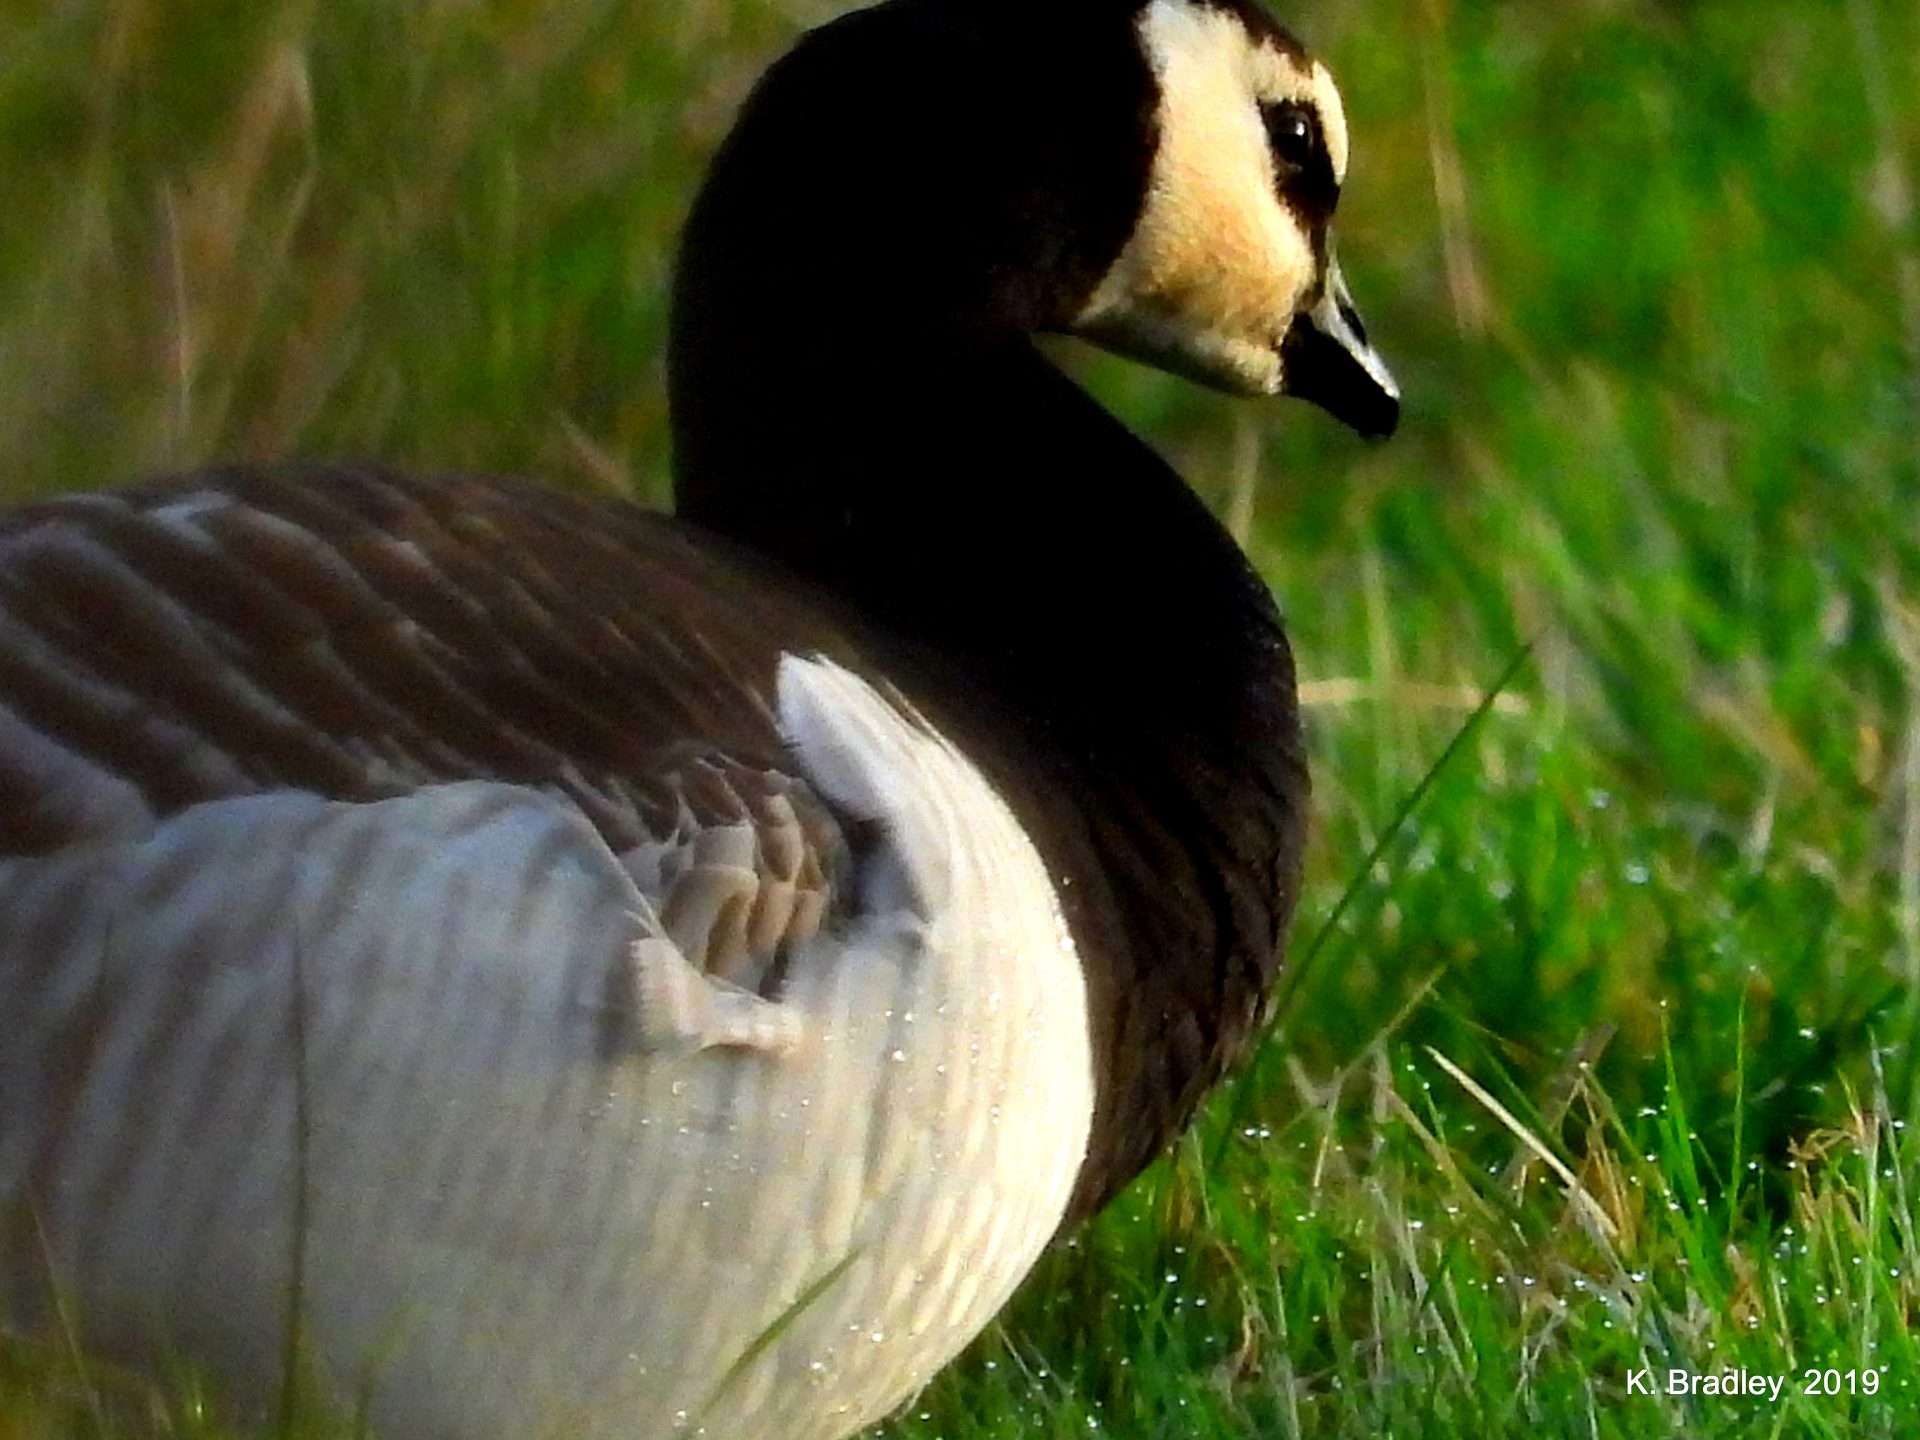 Barnacle Goose by Kenneth Bradley at Exminster marshes RSPB